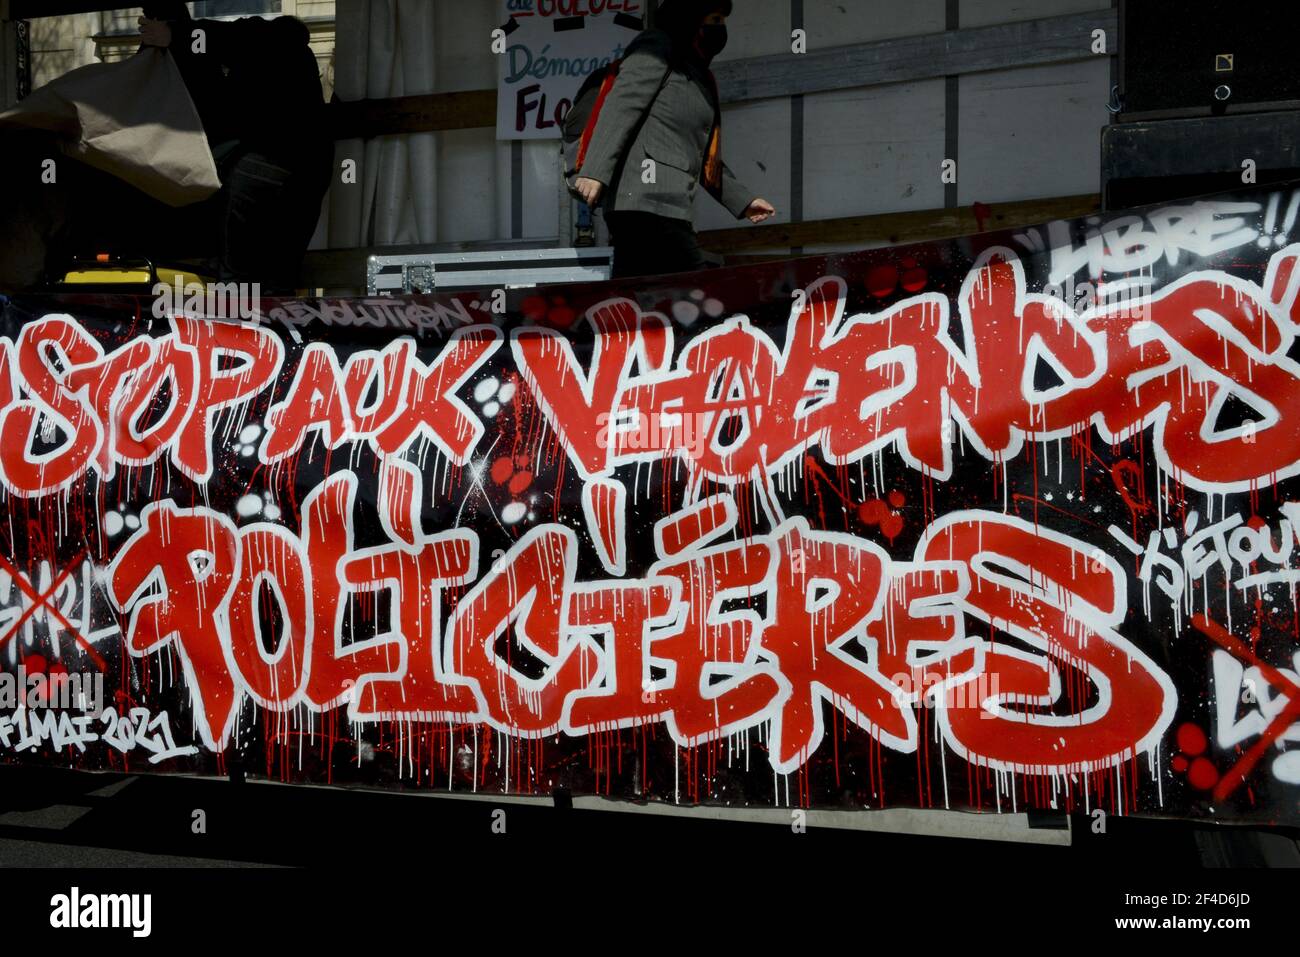 Demonstration against systemic racism, police, prison and judicial violence in Paris, France, on March 20, 2021. Some thousands of demonstrators from the families of the victims, undocumented wave collectives marched from the gates of the Luxembourg Gardens to demand the application of their slogan: 'stop impunity'. Photo by Georges Darmon/Avenir Pictures/ABACAPRESS.COM Photo by Georges Darmon/Avenir Pictures/ABACAPRESS.COM Stock Photo